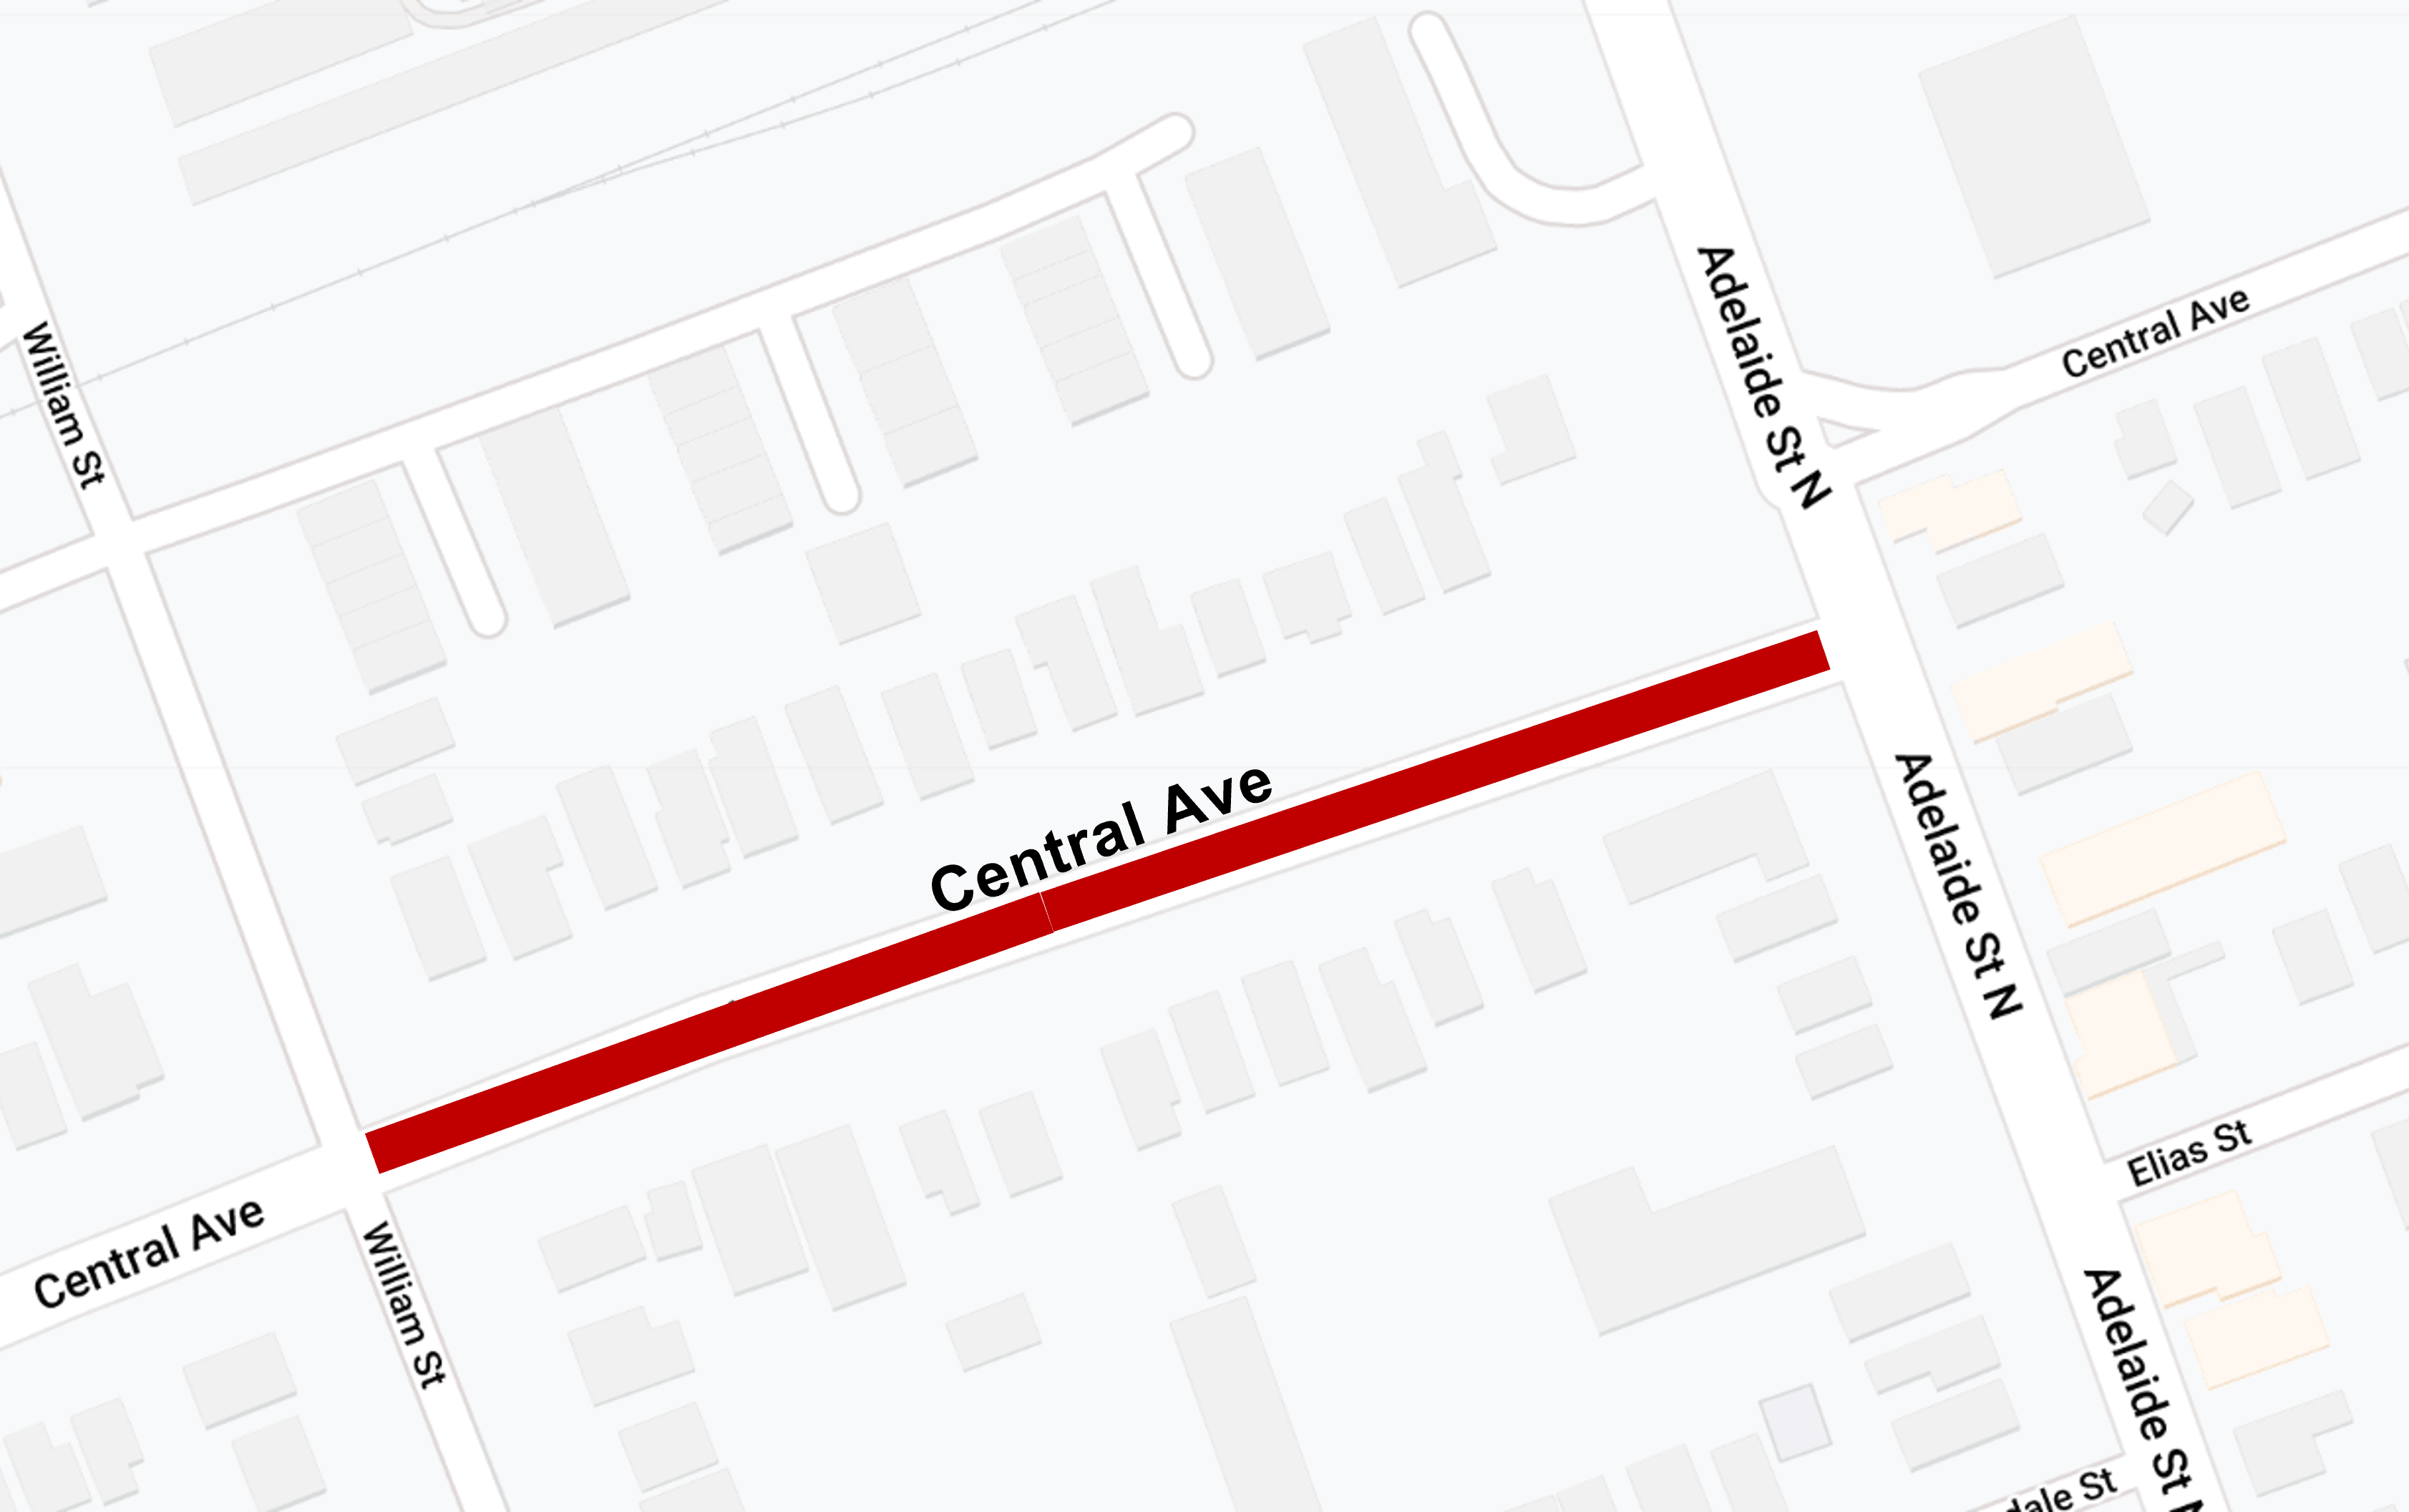 Central Ave closure between Adelaide St and William St